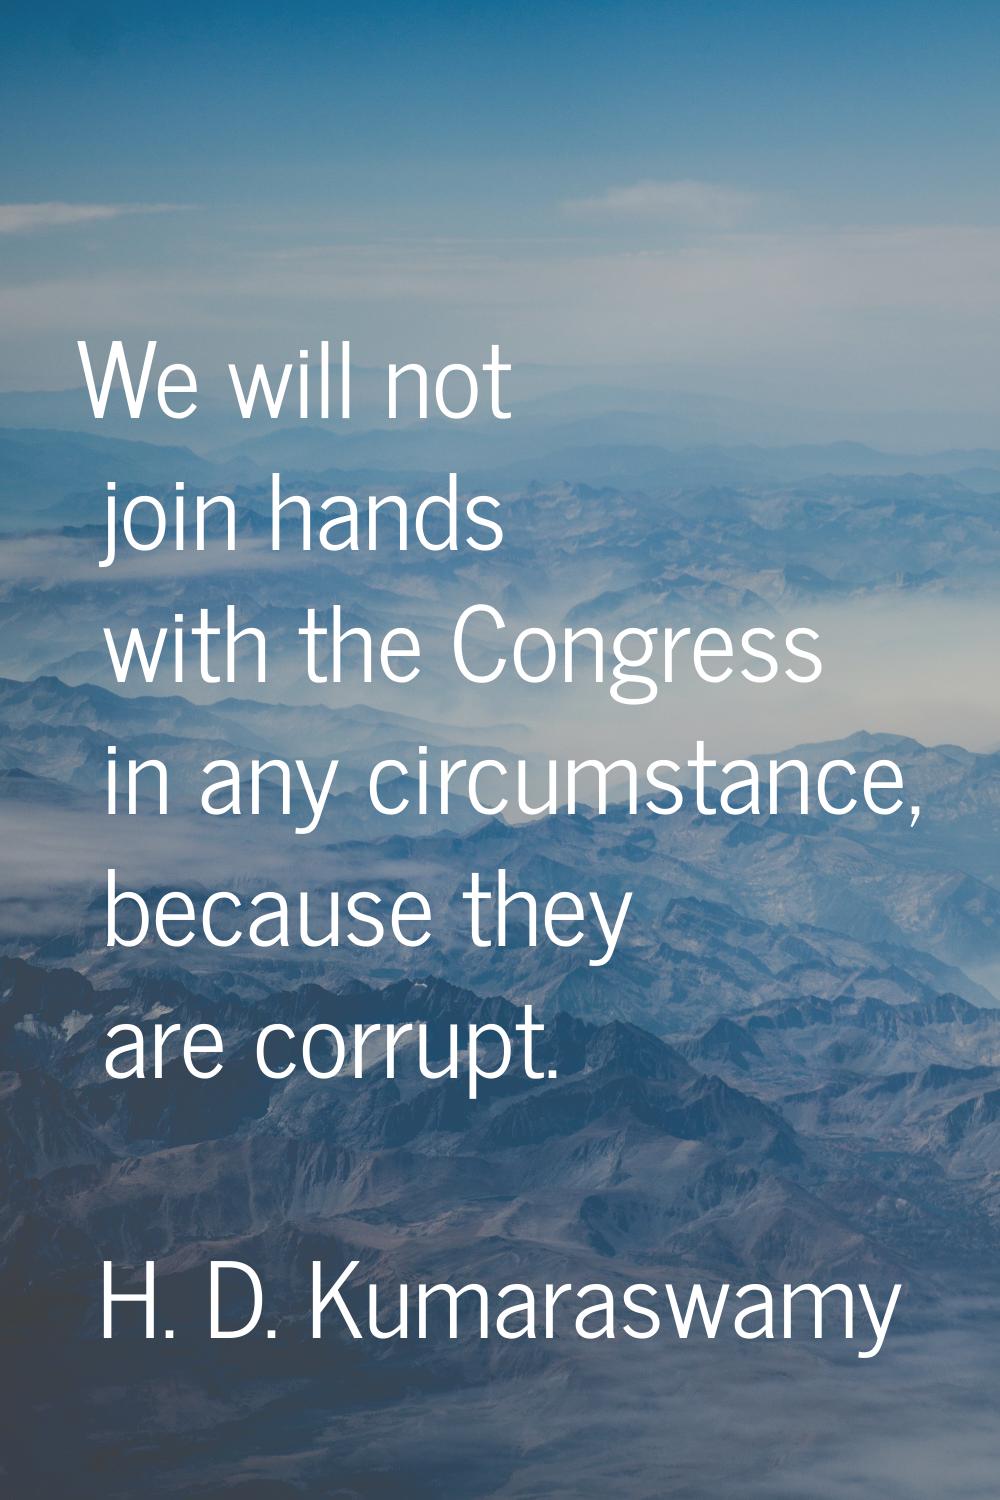 We will not join hands with the Congress in any circumstance, because they are corrupt.